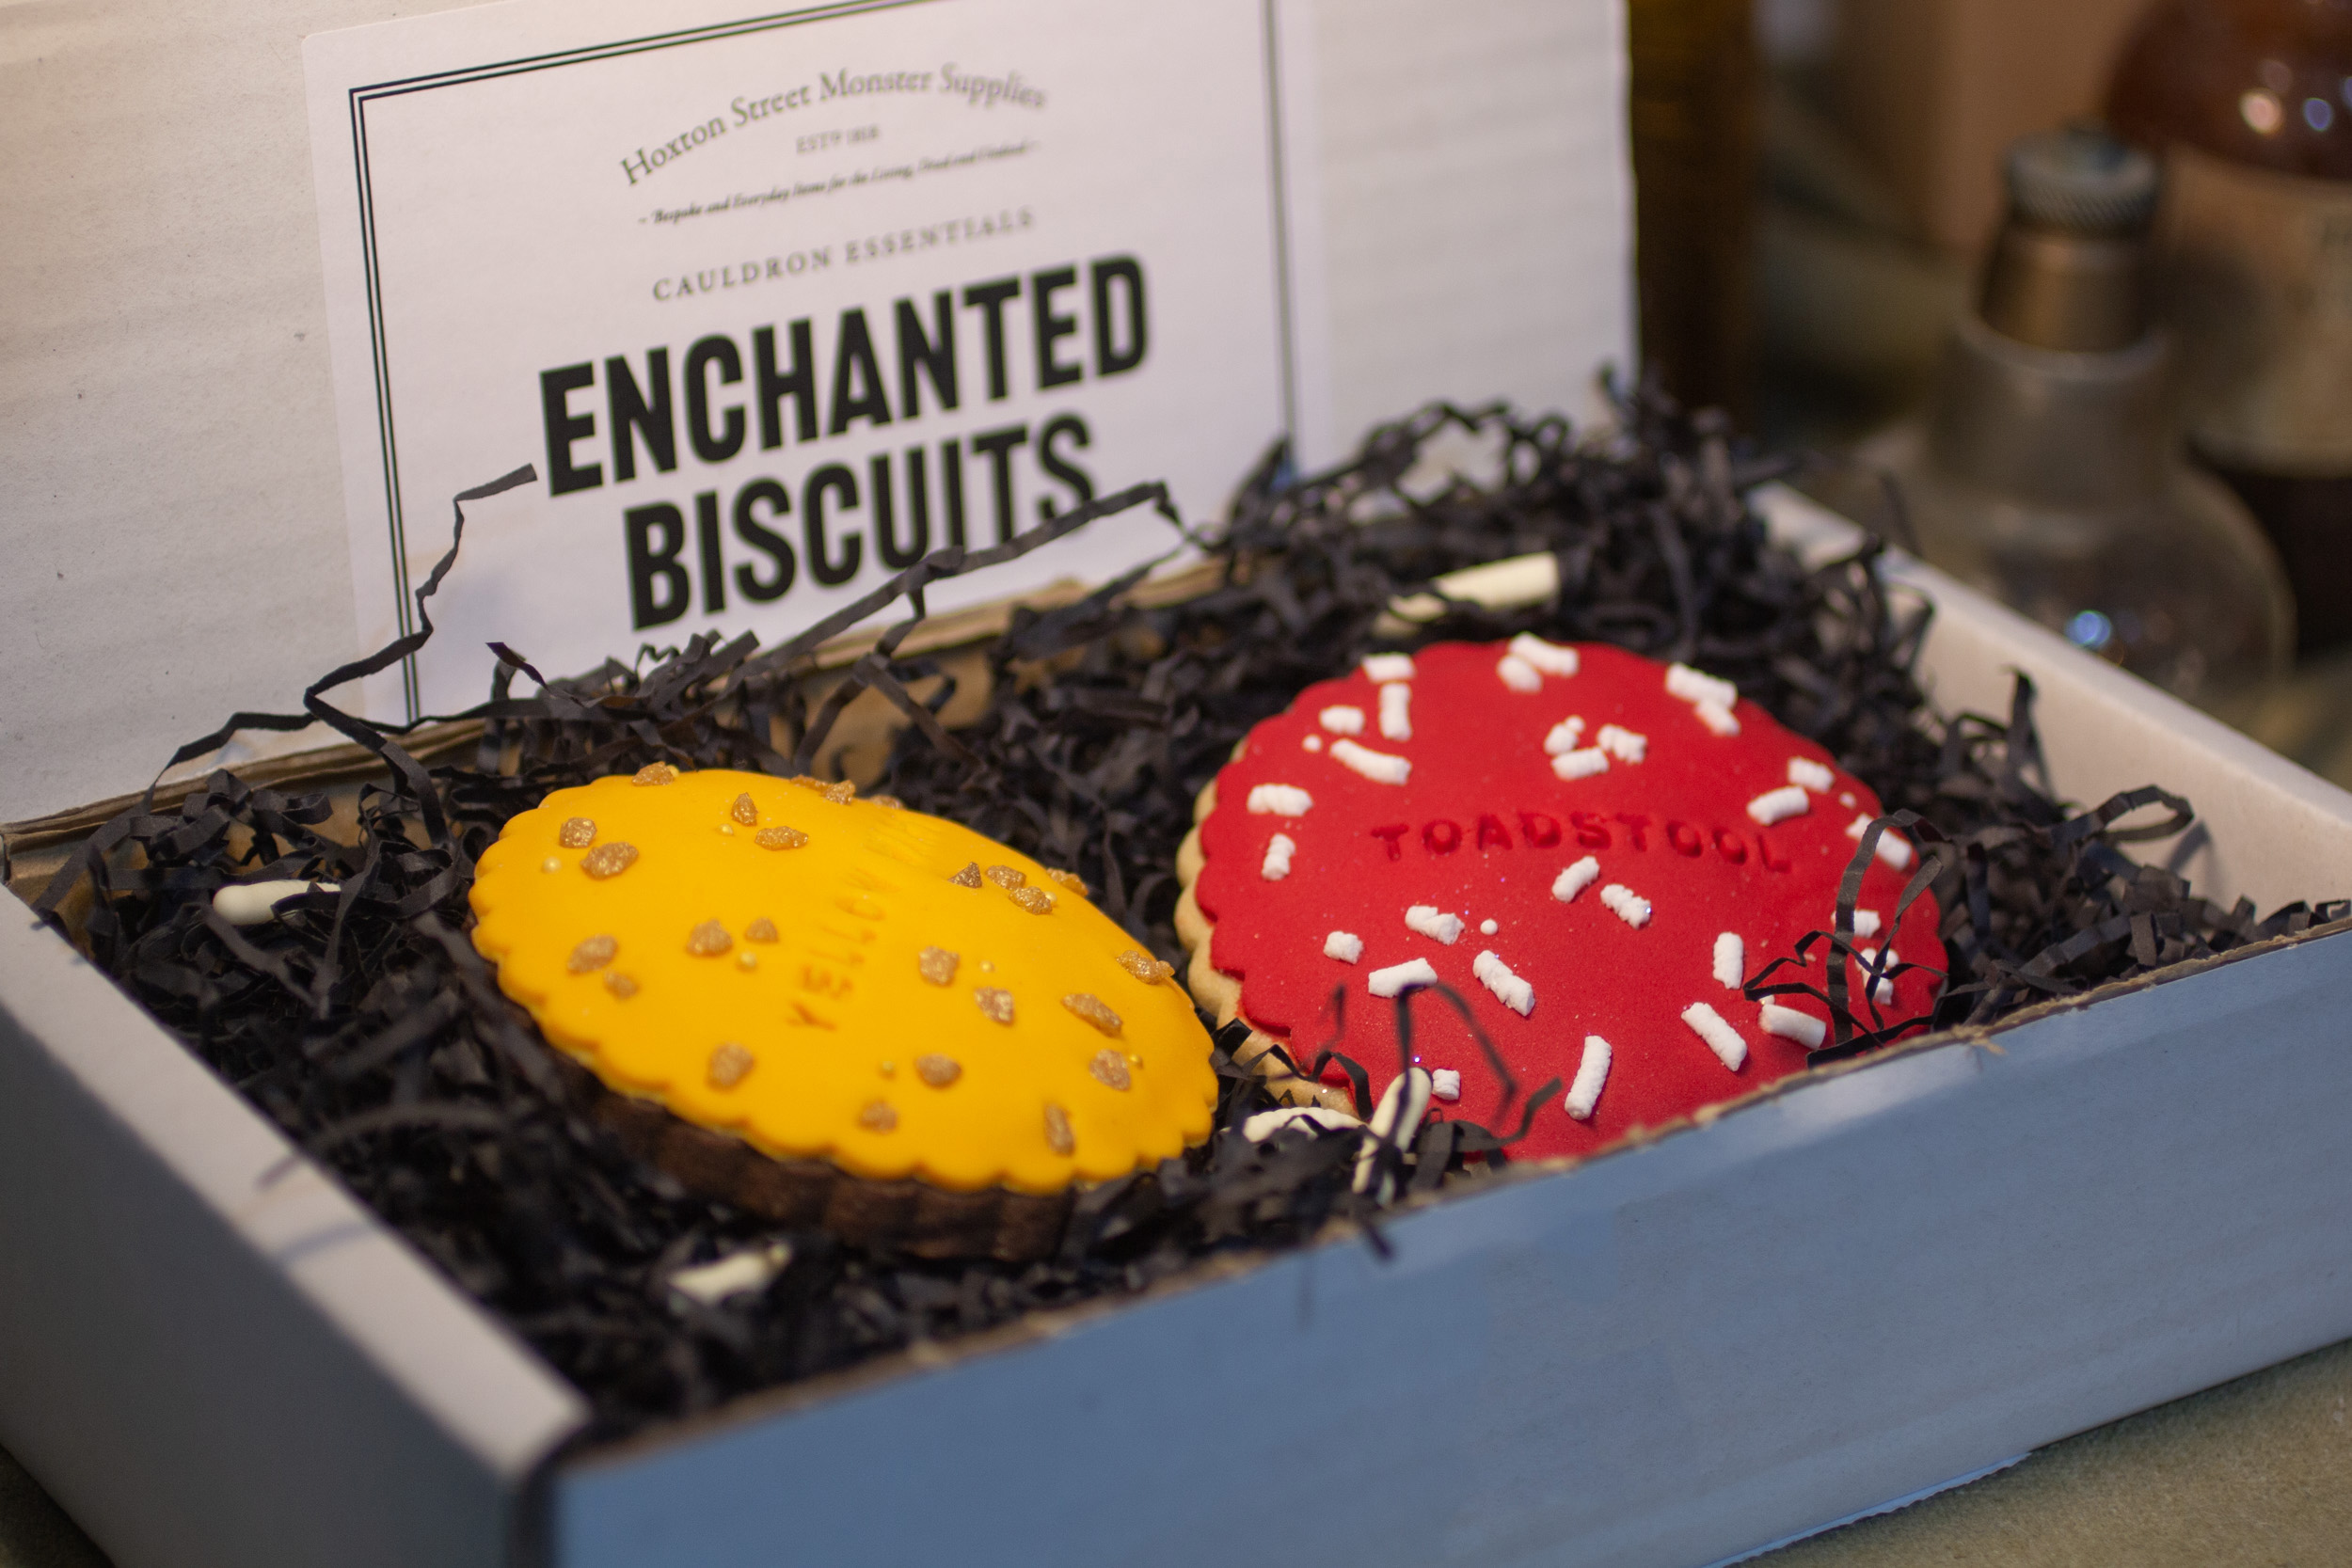 16 Enchanted Biscuits